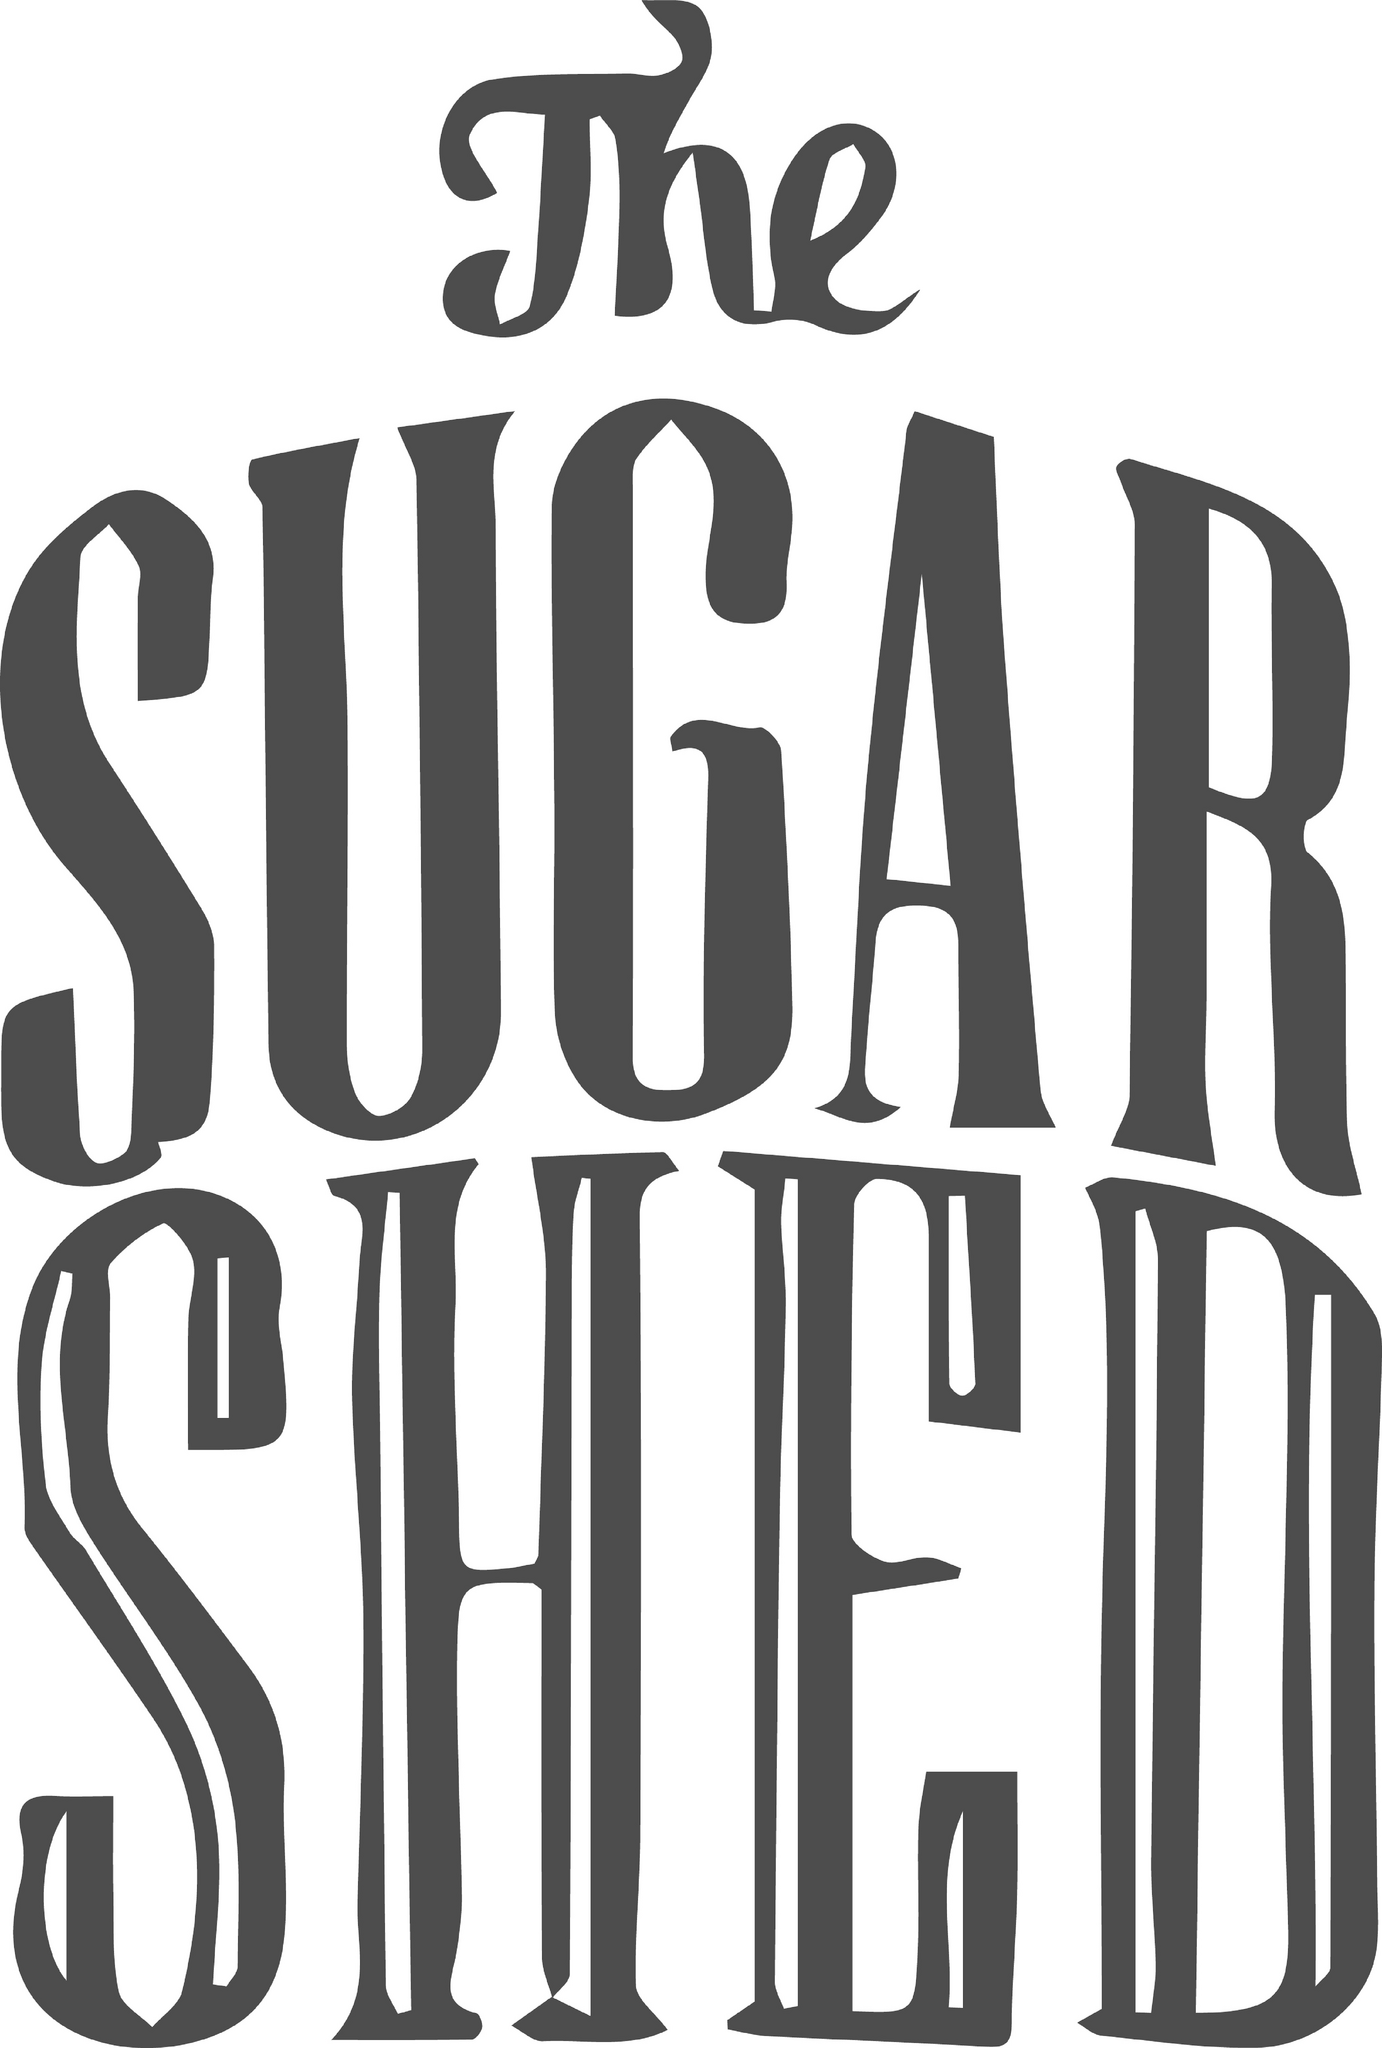 The Sugar Shed